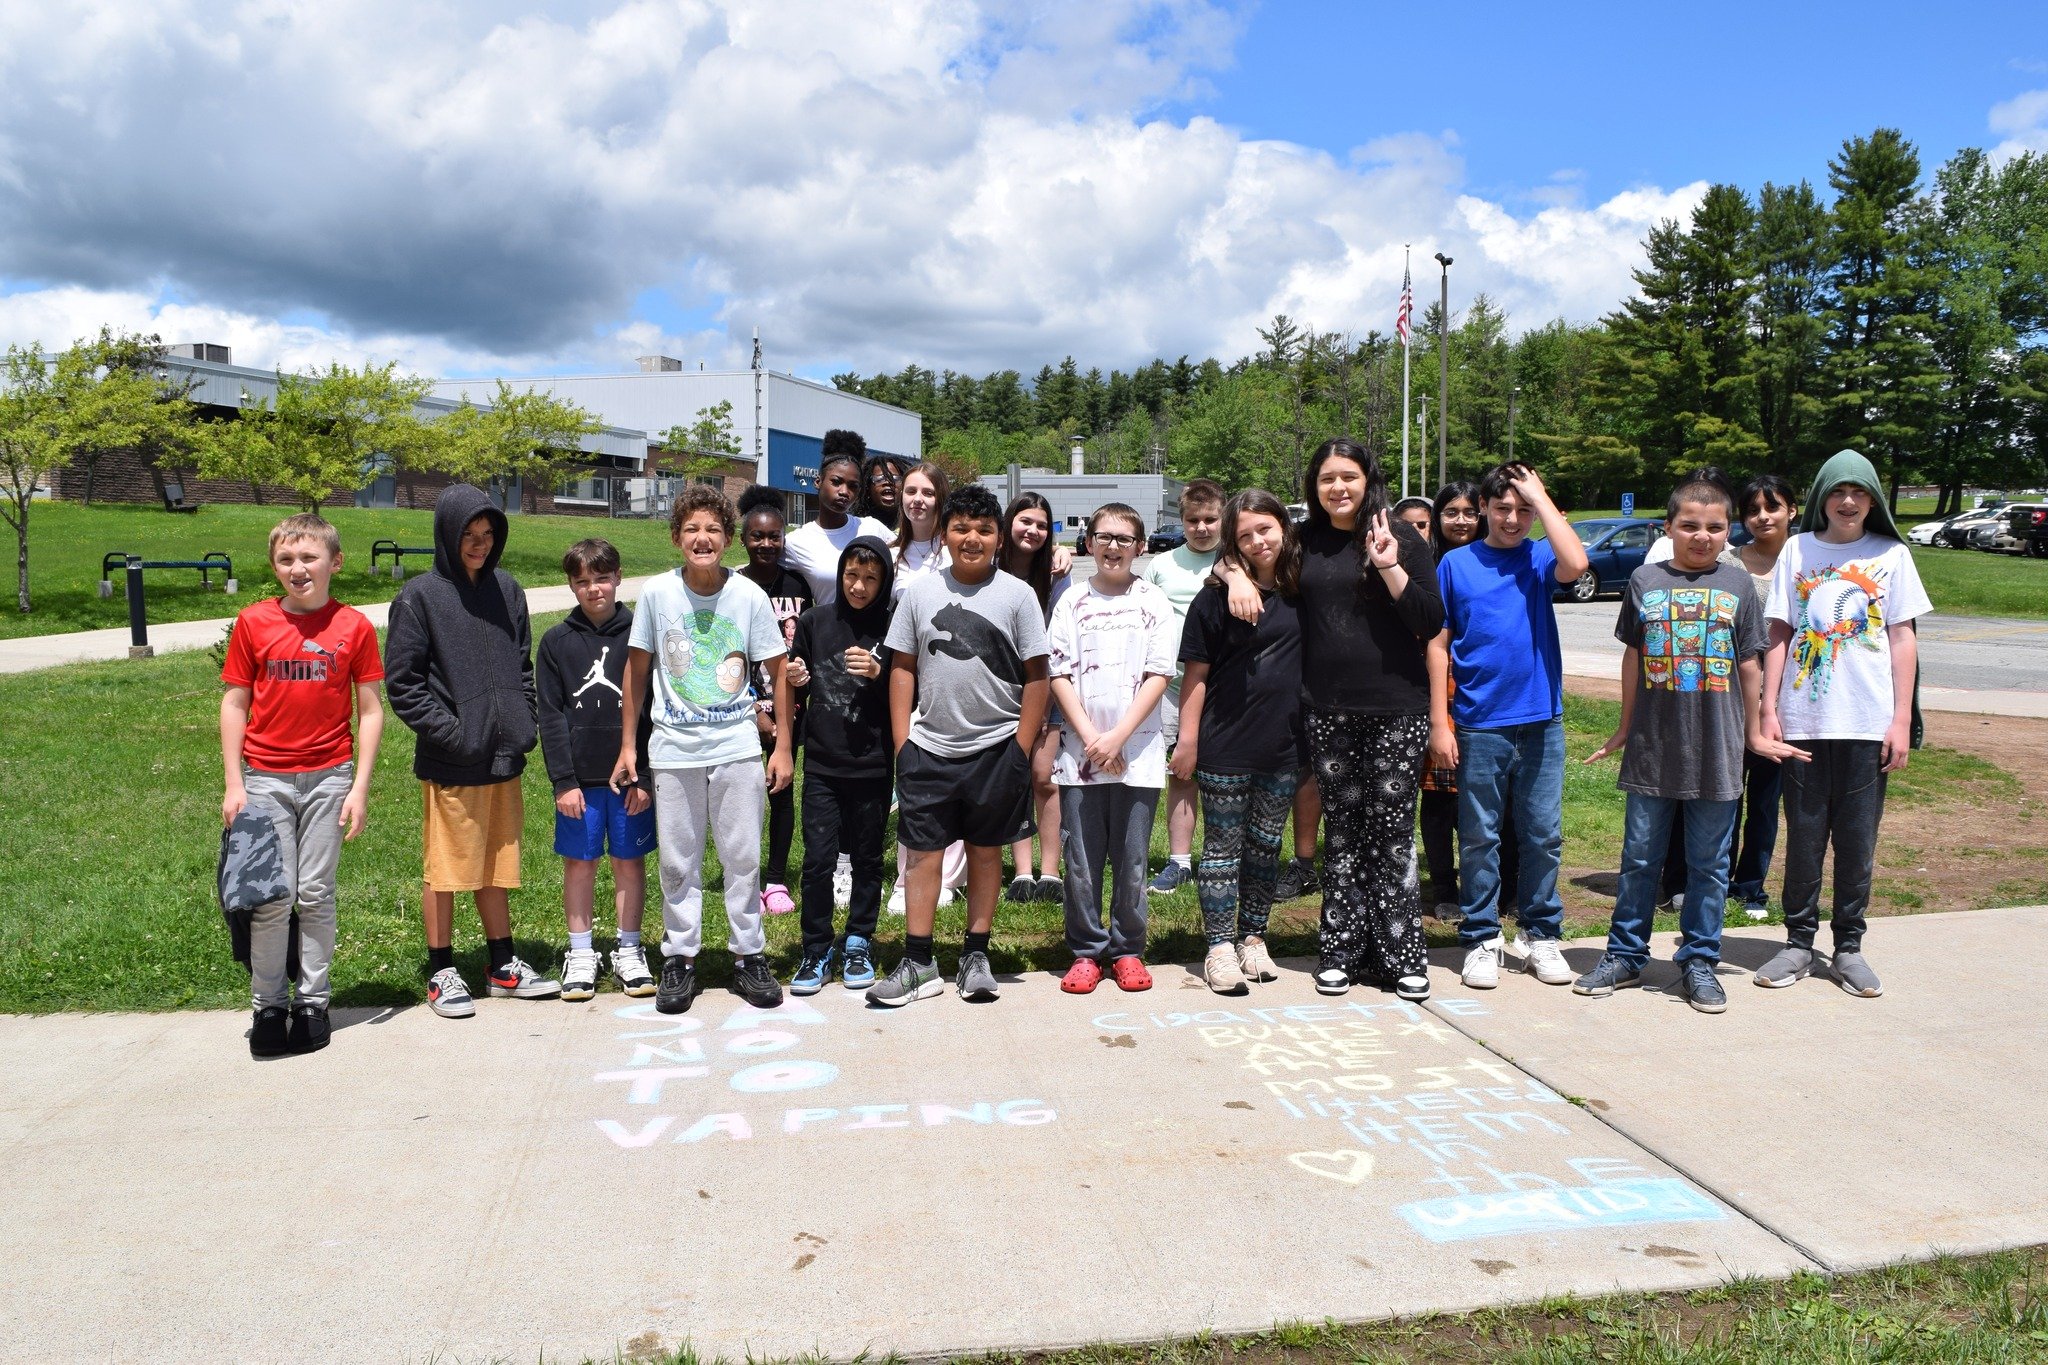 #TobaccoExposed! As part of their 𝗖𝗔𝗧𝗖𝗛 𝗠𝘆 𝗕𝗿𝗲𝗮𝘁𝗵 program, two 6th grade classes at Robert J. Kaiser Monticello Middle School did a Chalk the Walk on their school sidewalks for World No Tobacco Day! 

𝗪𝗼𝗿𝗹𝗱 𝗡𝗼 𝗧𝗼𝗯𝗮𝗰𝗰𝗼 𝗗𝗮?